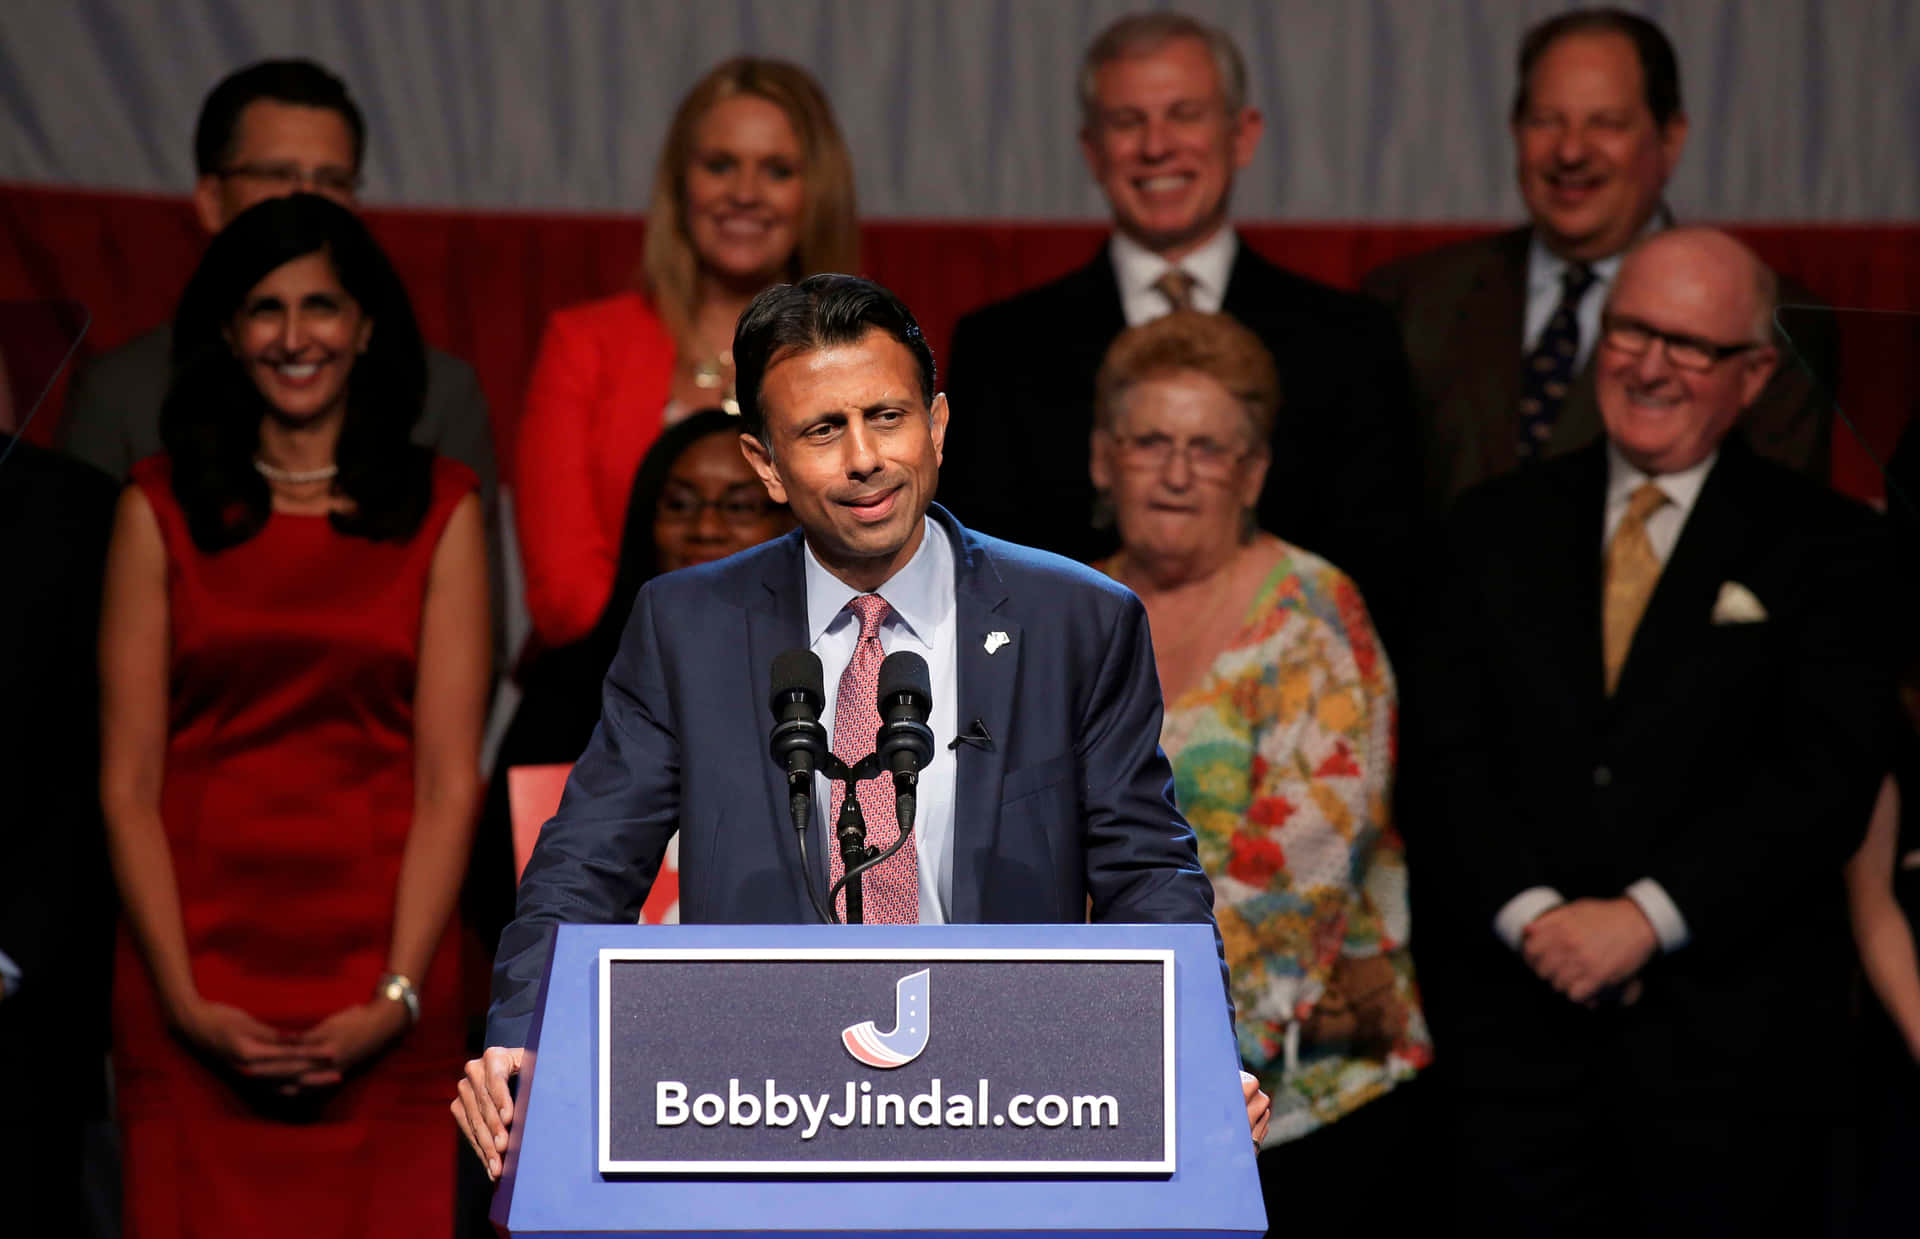 Bobby Jindal at a Campaign Event Wallpaper